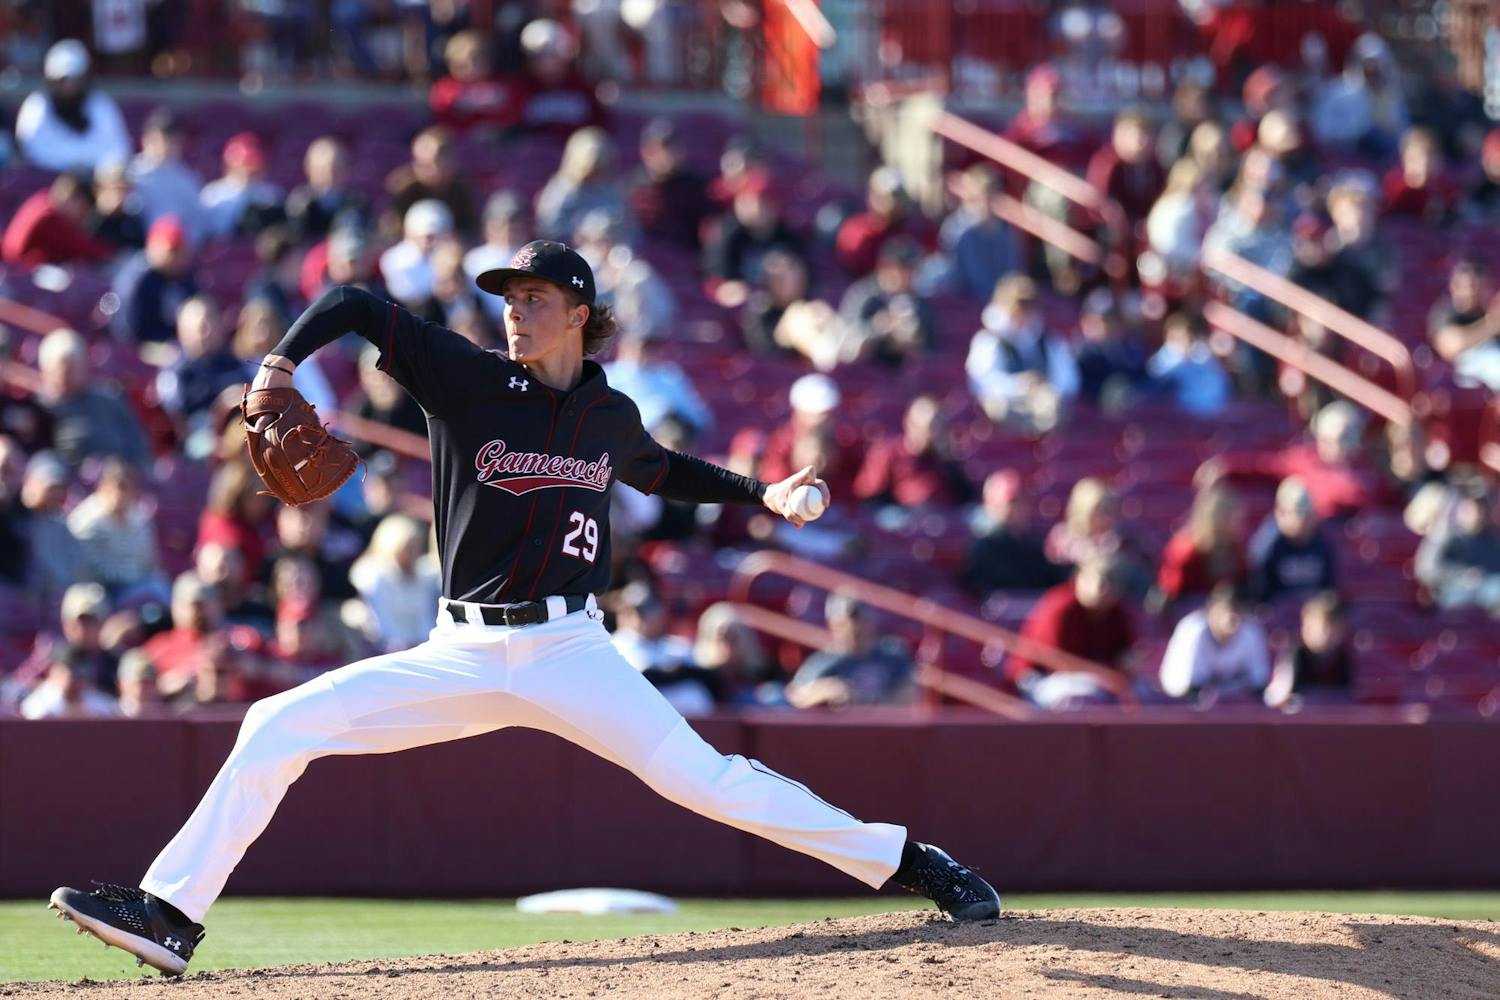 The South Carolina baseball team reached its fourth run-rule victory of the season and clinched a series win against Belmont on Feb. 25, 2024, at Founders Park. The ɫɫƵs started the weekend with an 8-1 victory Friday, followed by an 11-2 loss in game two on Saturday before wrapping up the weekend with a 12-1 victory over the Bruins. The team will continue its nine-game homestead on Tuesday when it hosts Gardner-Webb.&nbsp;